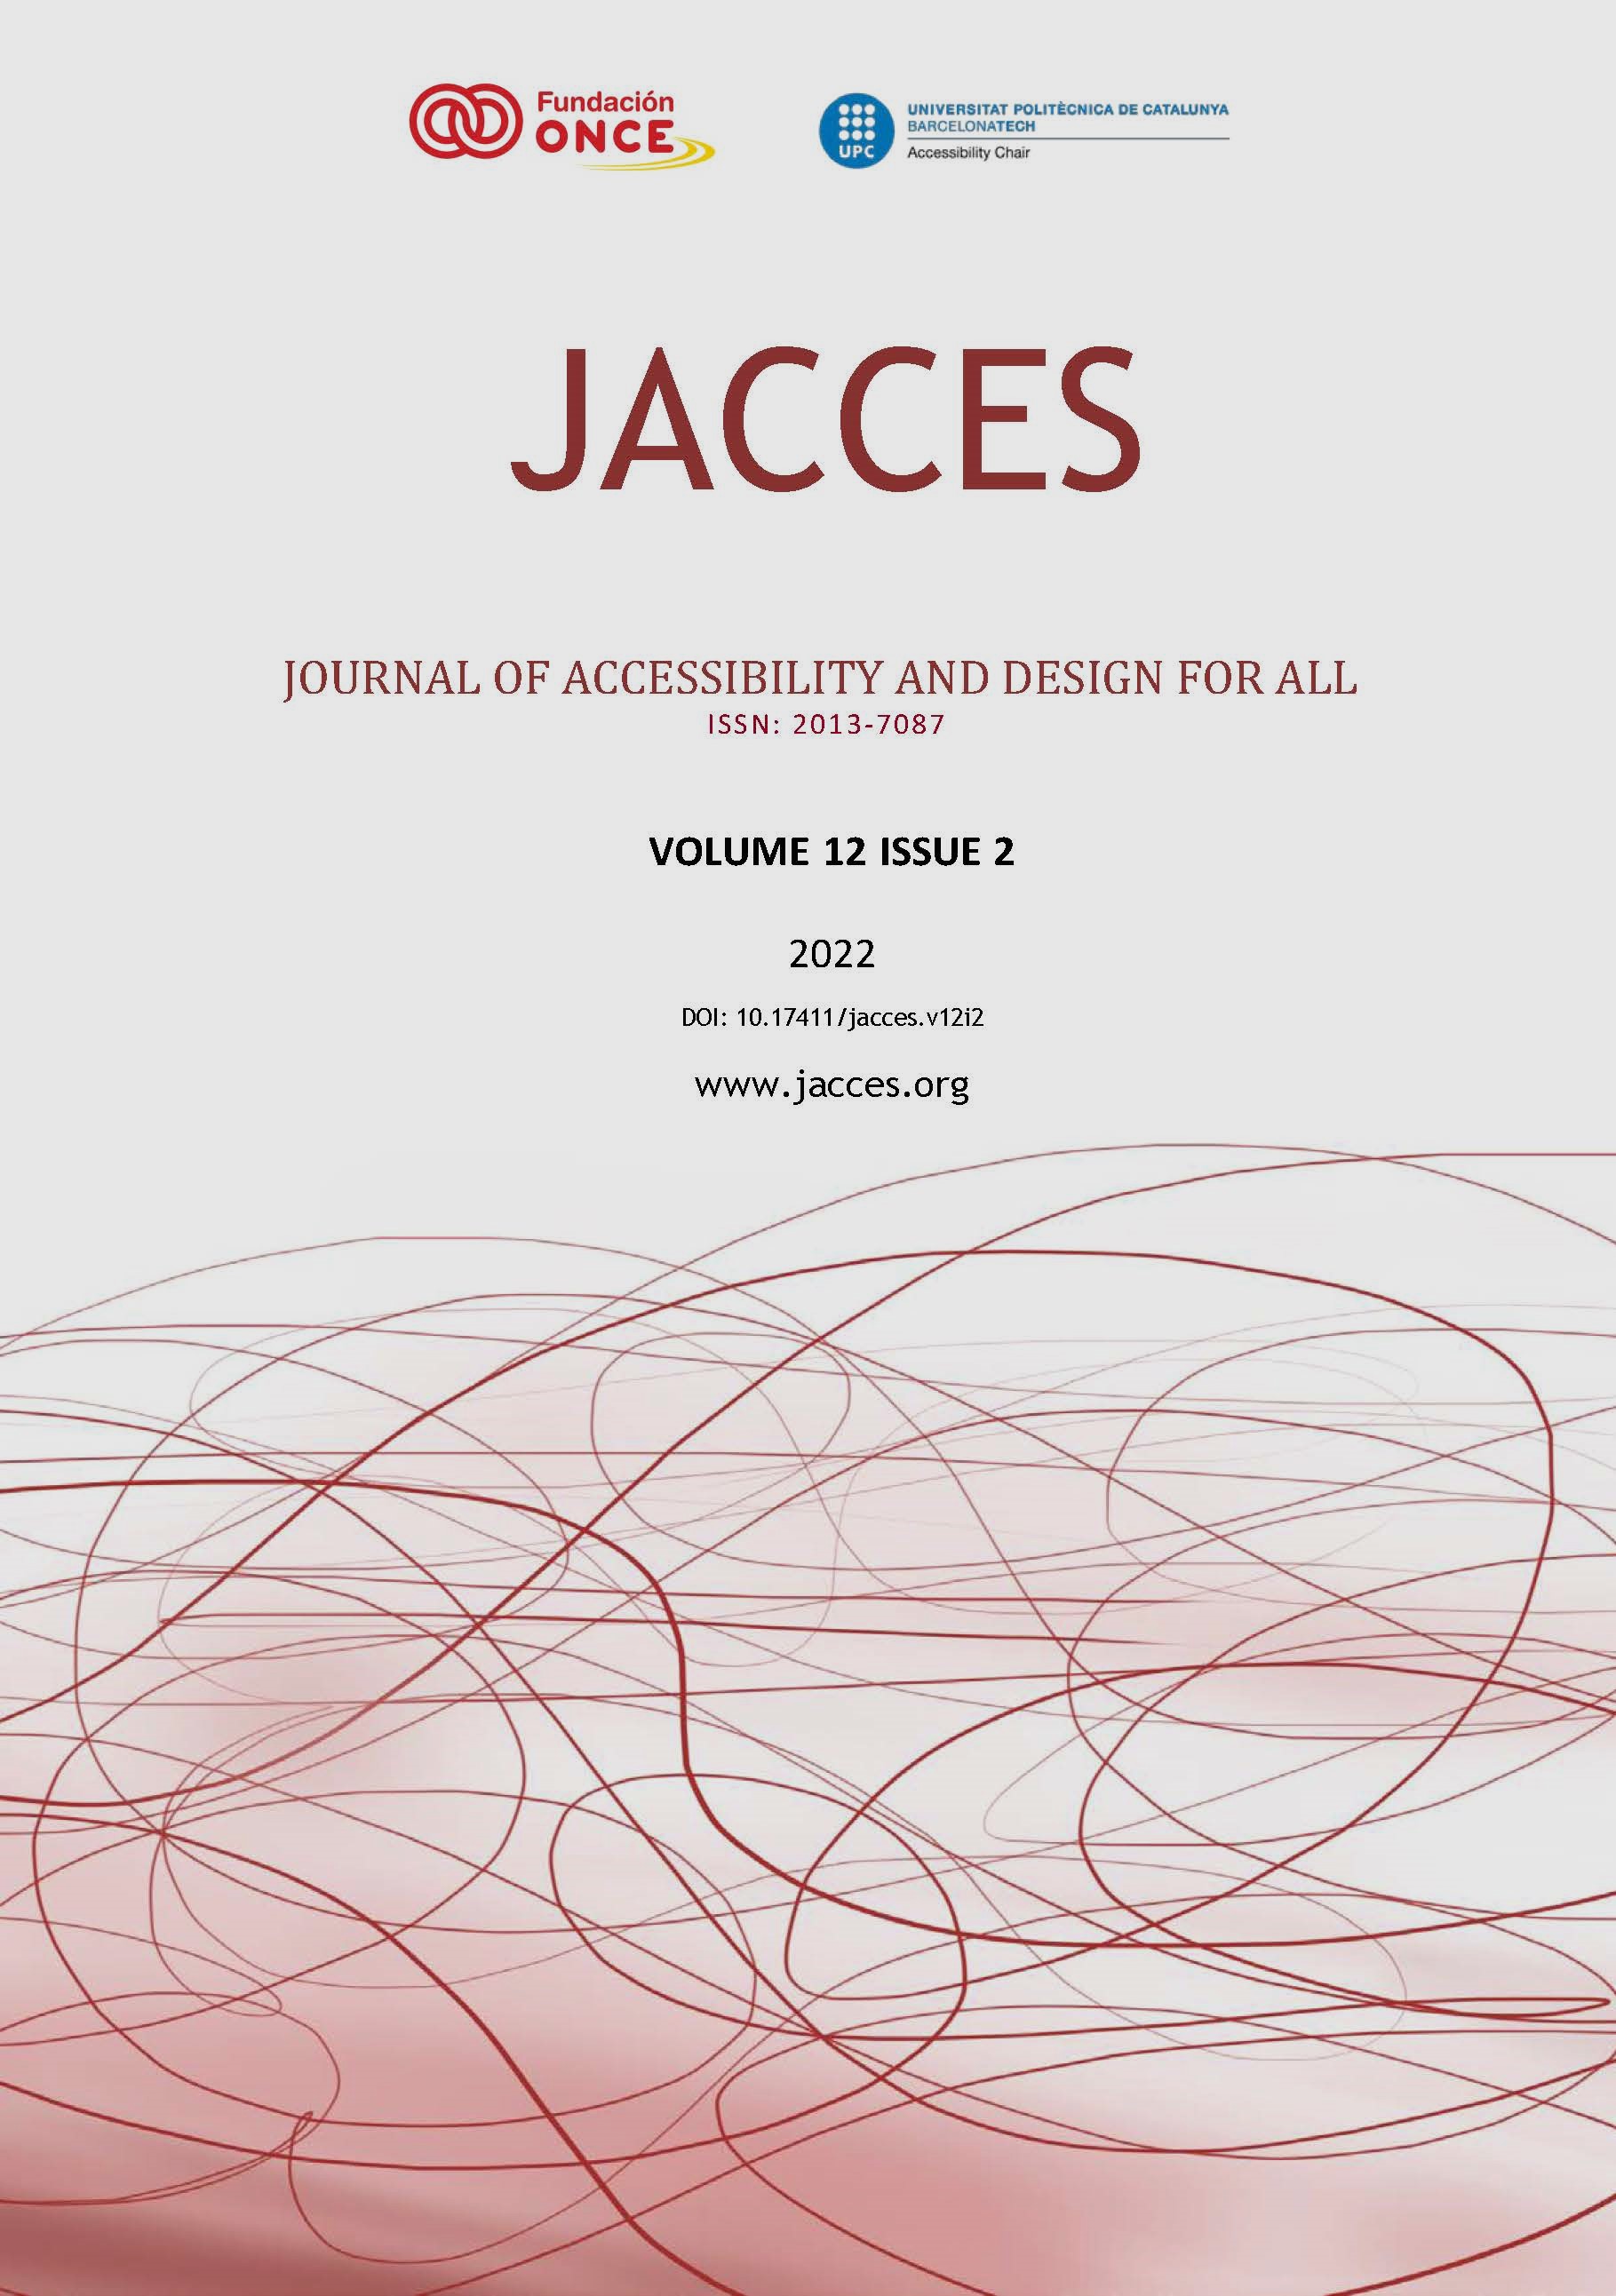 Cover of Journal of Accessibility and Design for All Vol. 12 No. 2 (2022)